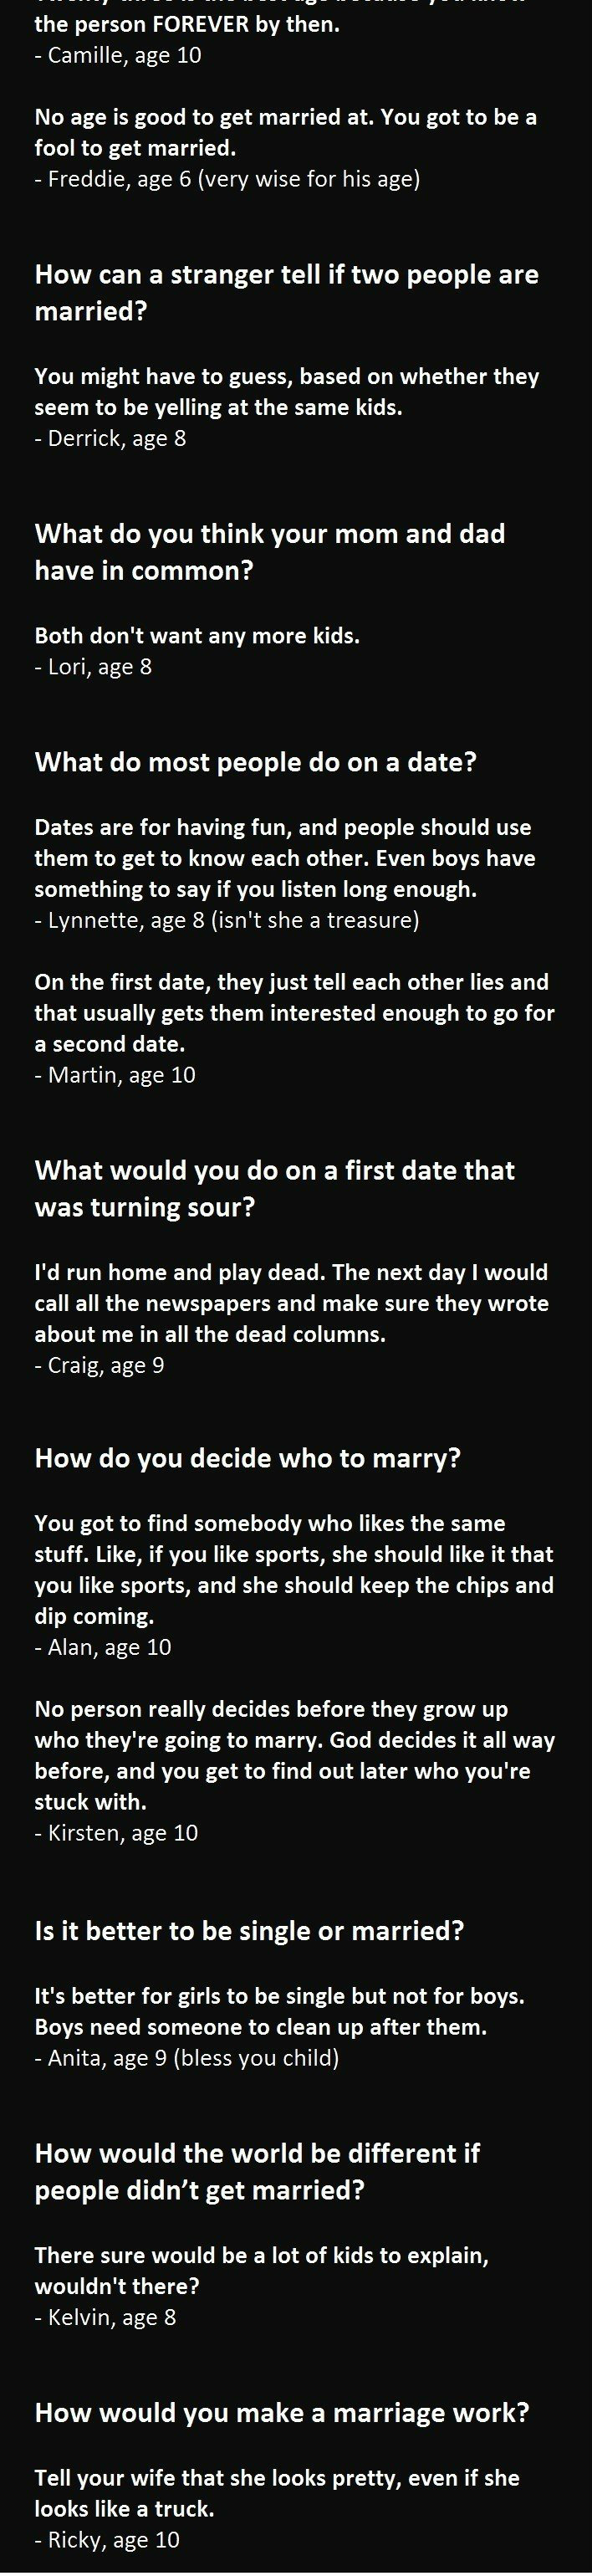 15 KIDS GET ASKED ABOUT MARRIAGE. #8 IS GOING FAR IN LIFE LONG. - Funny ...